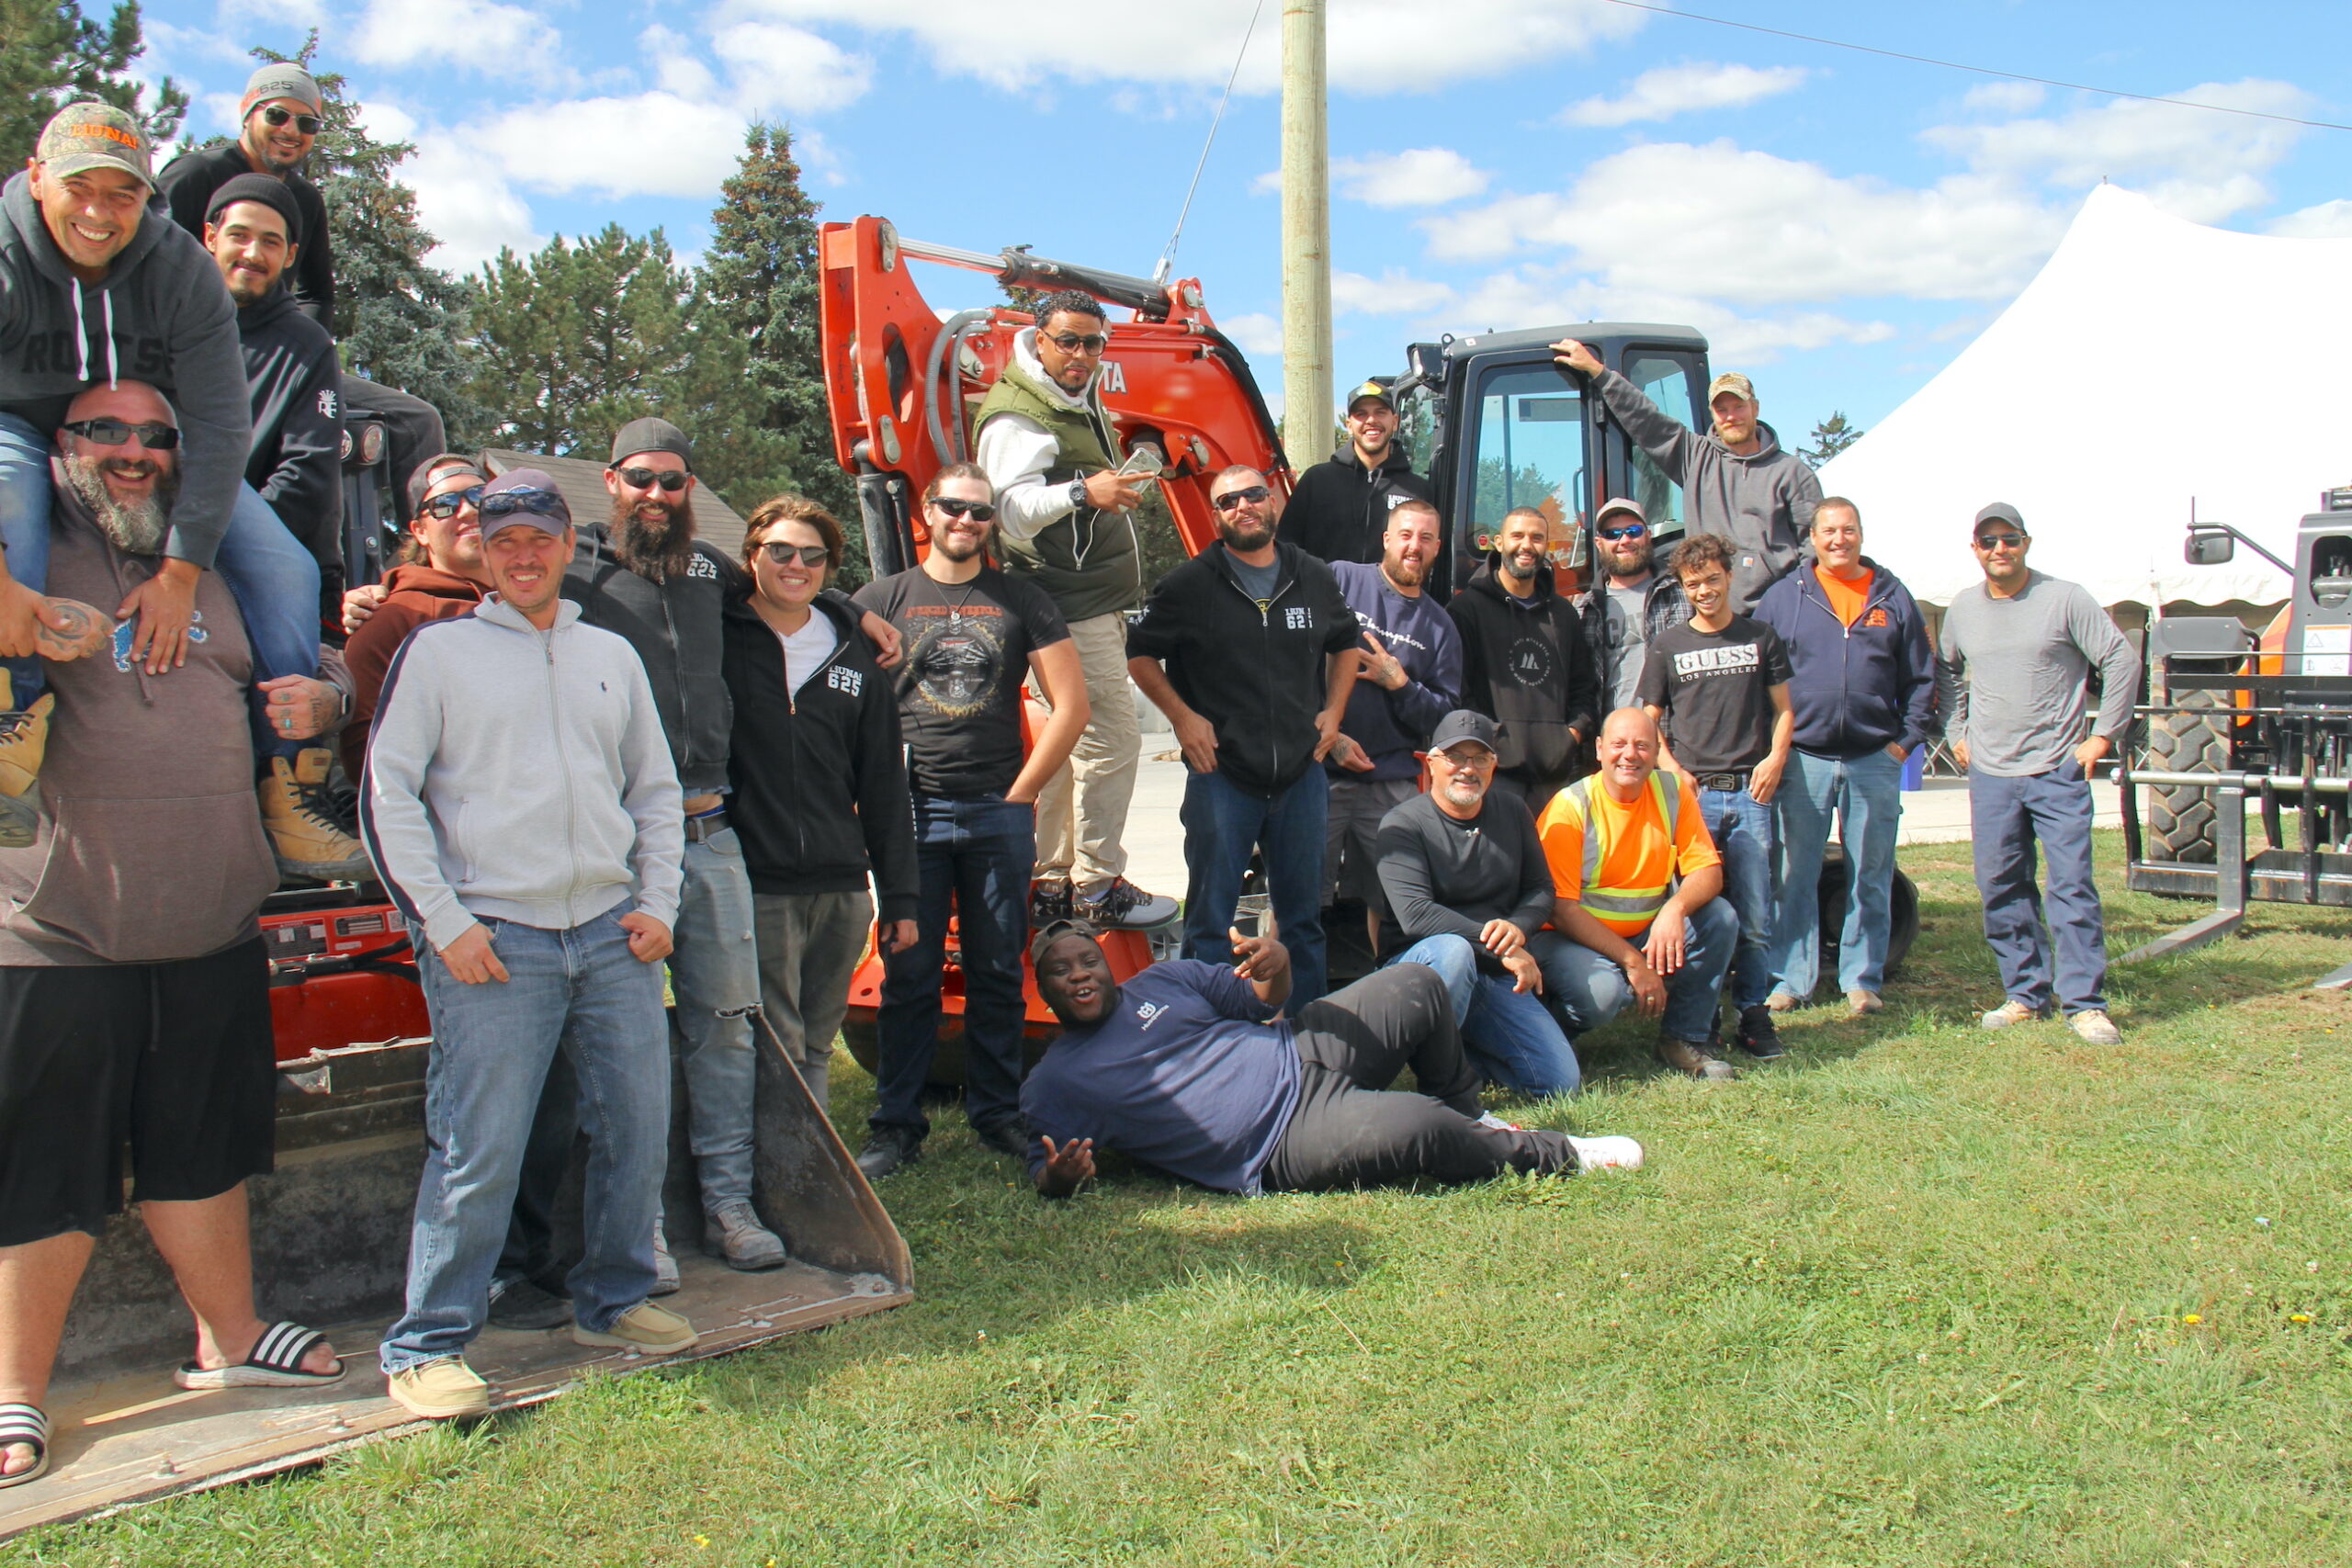 Congratulations to our Construction Craft Worker Level I Graduates, August 2 - September 23, 2022